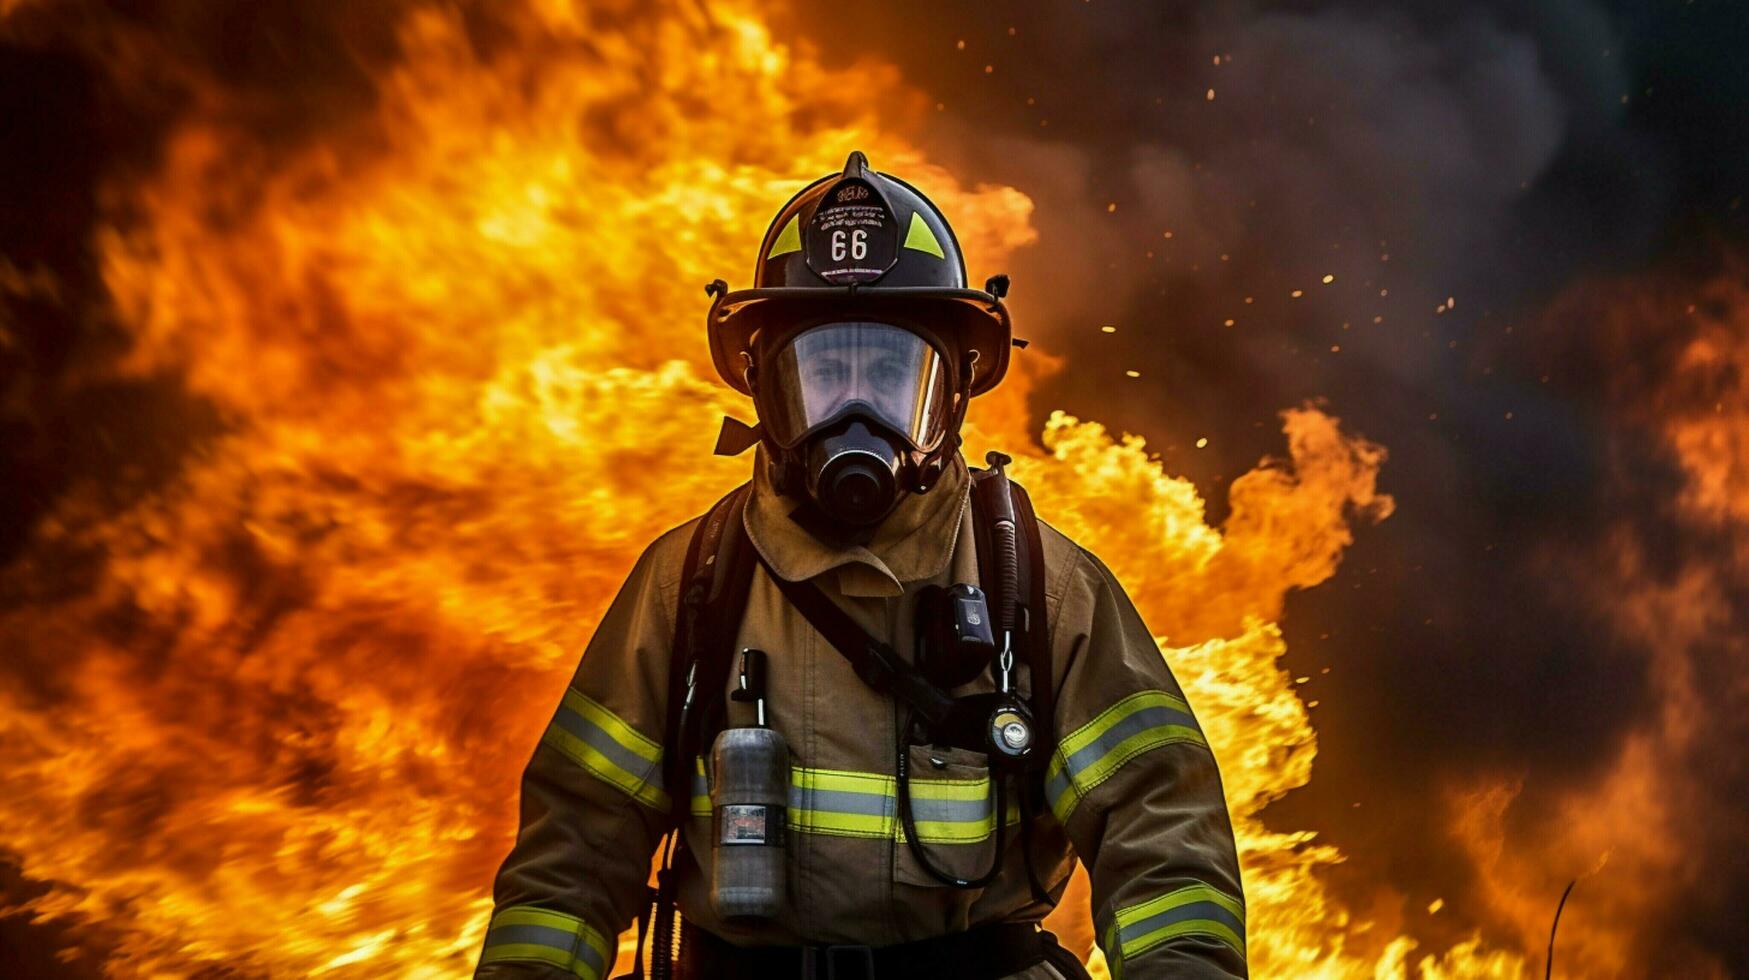 firefighter in protective gear battles raging photo